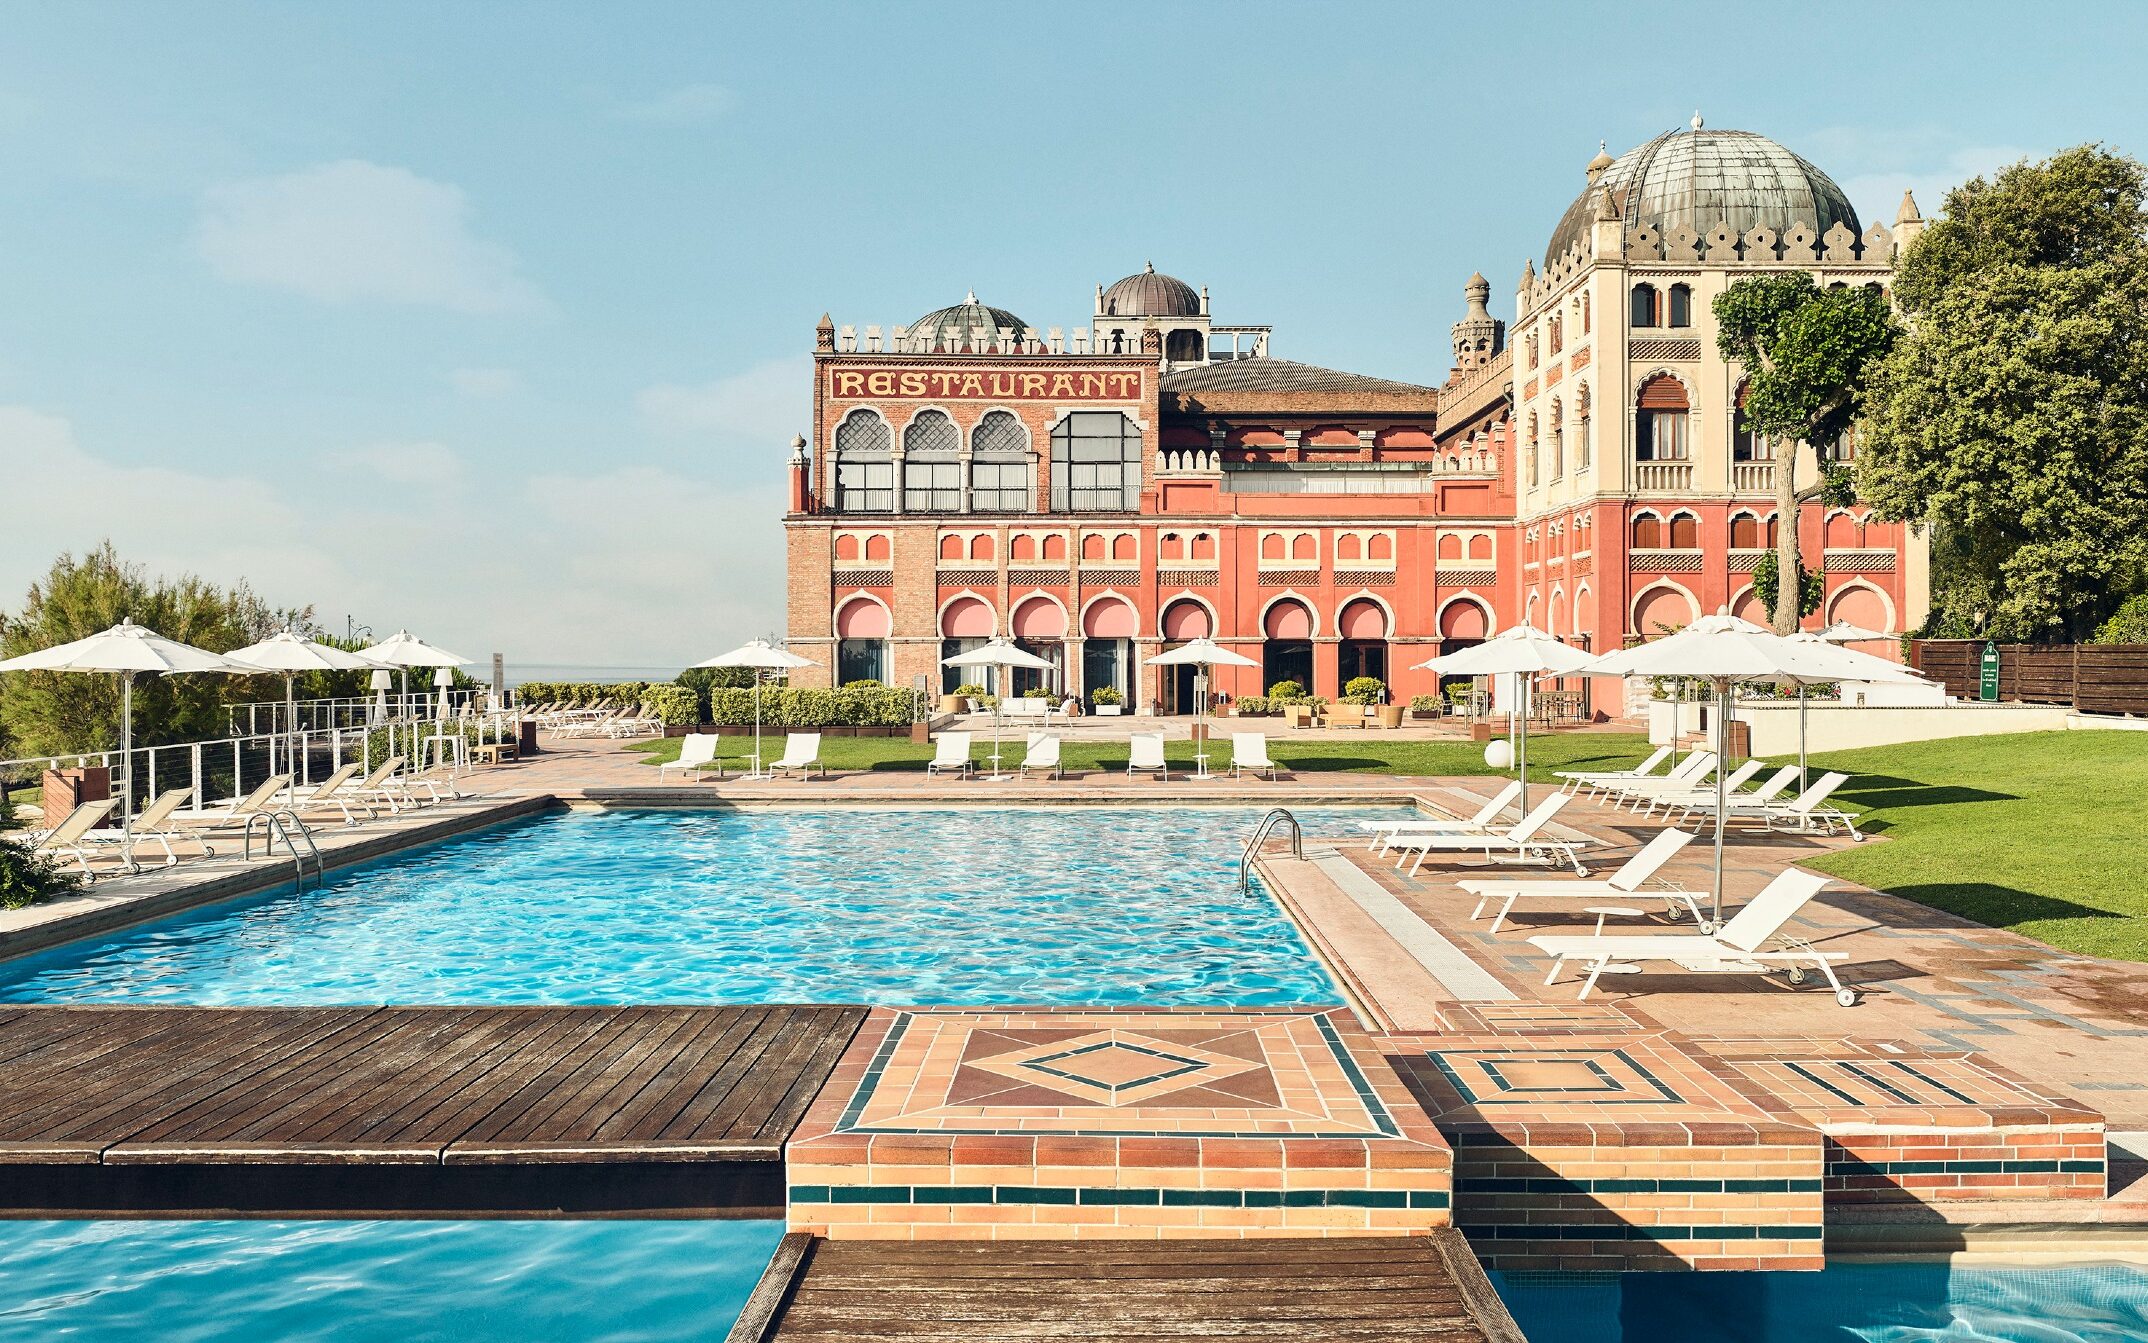 This Iconic Hotel Is The Home to the Famed Venice Film Festival